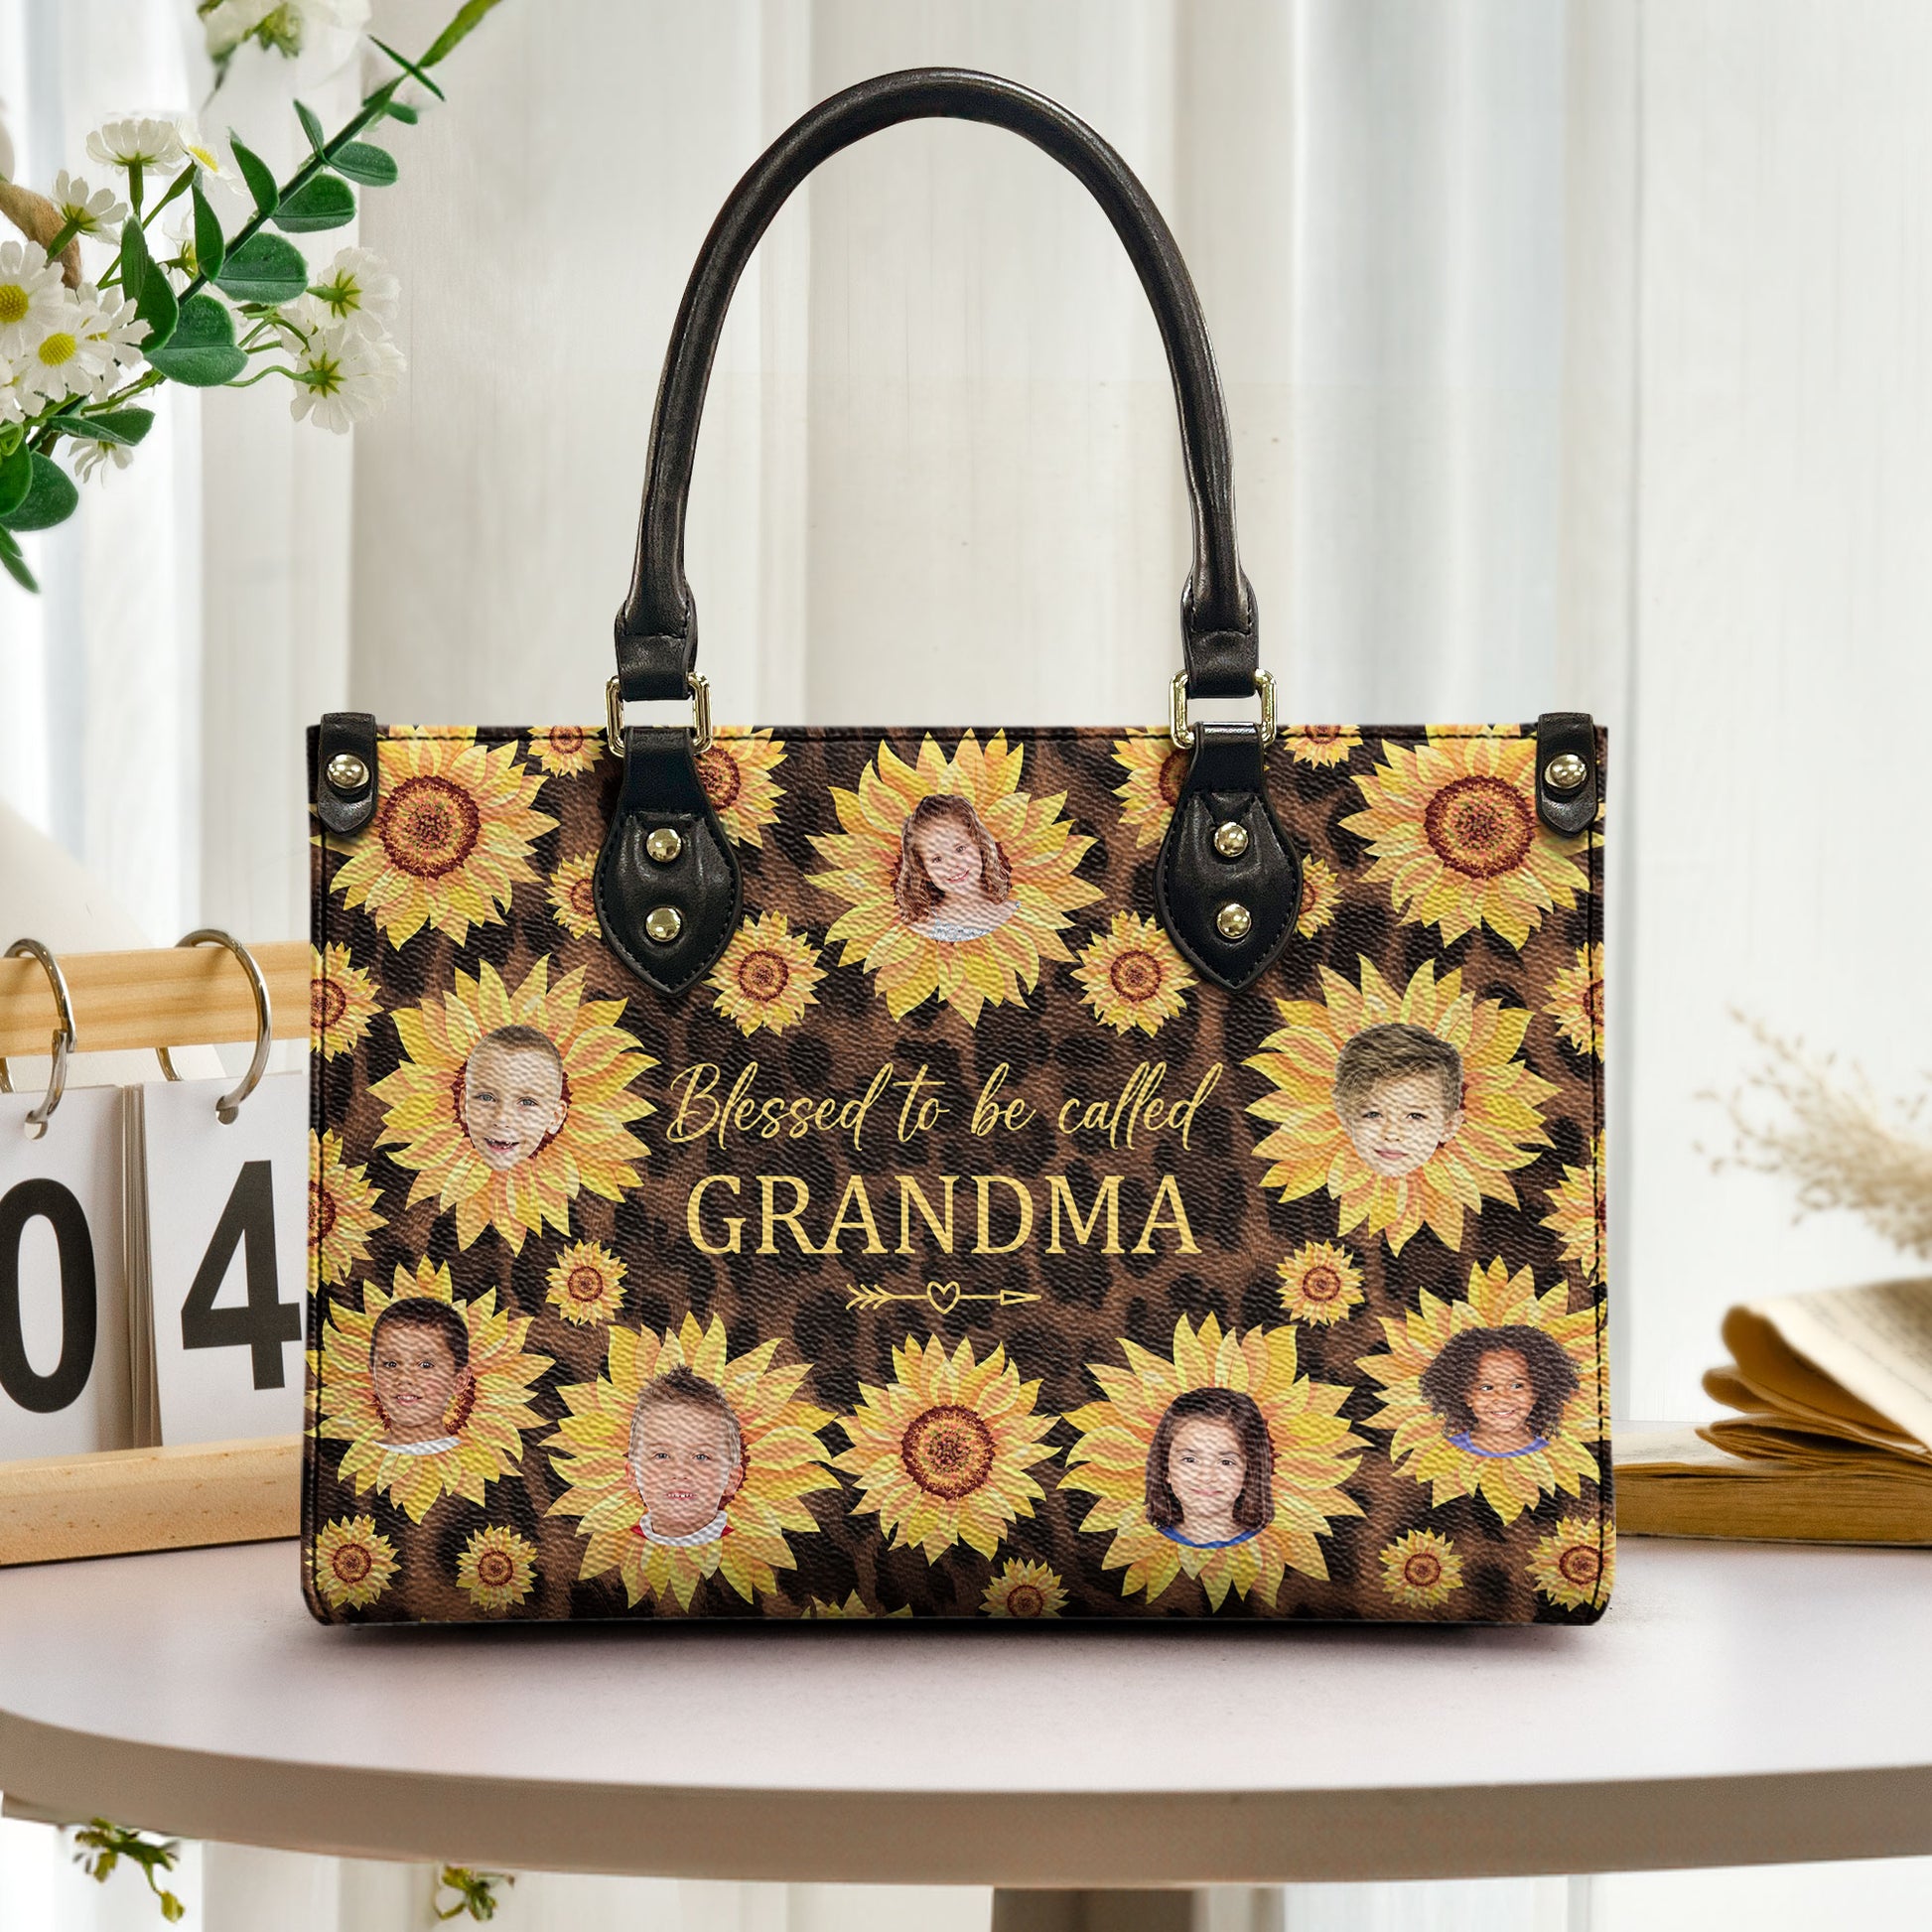 Blessed To Be Called Grandma - Personalized Photo Leather Bag